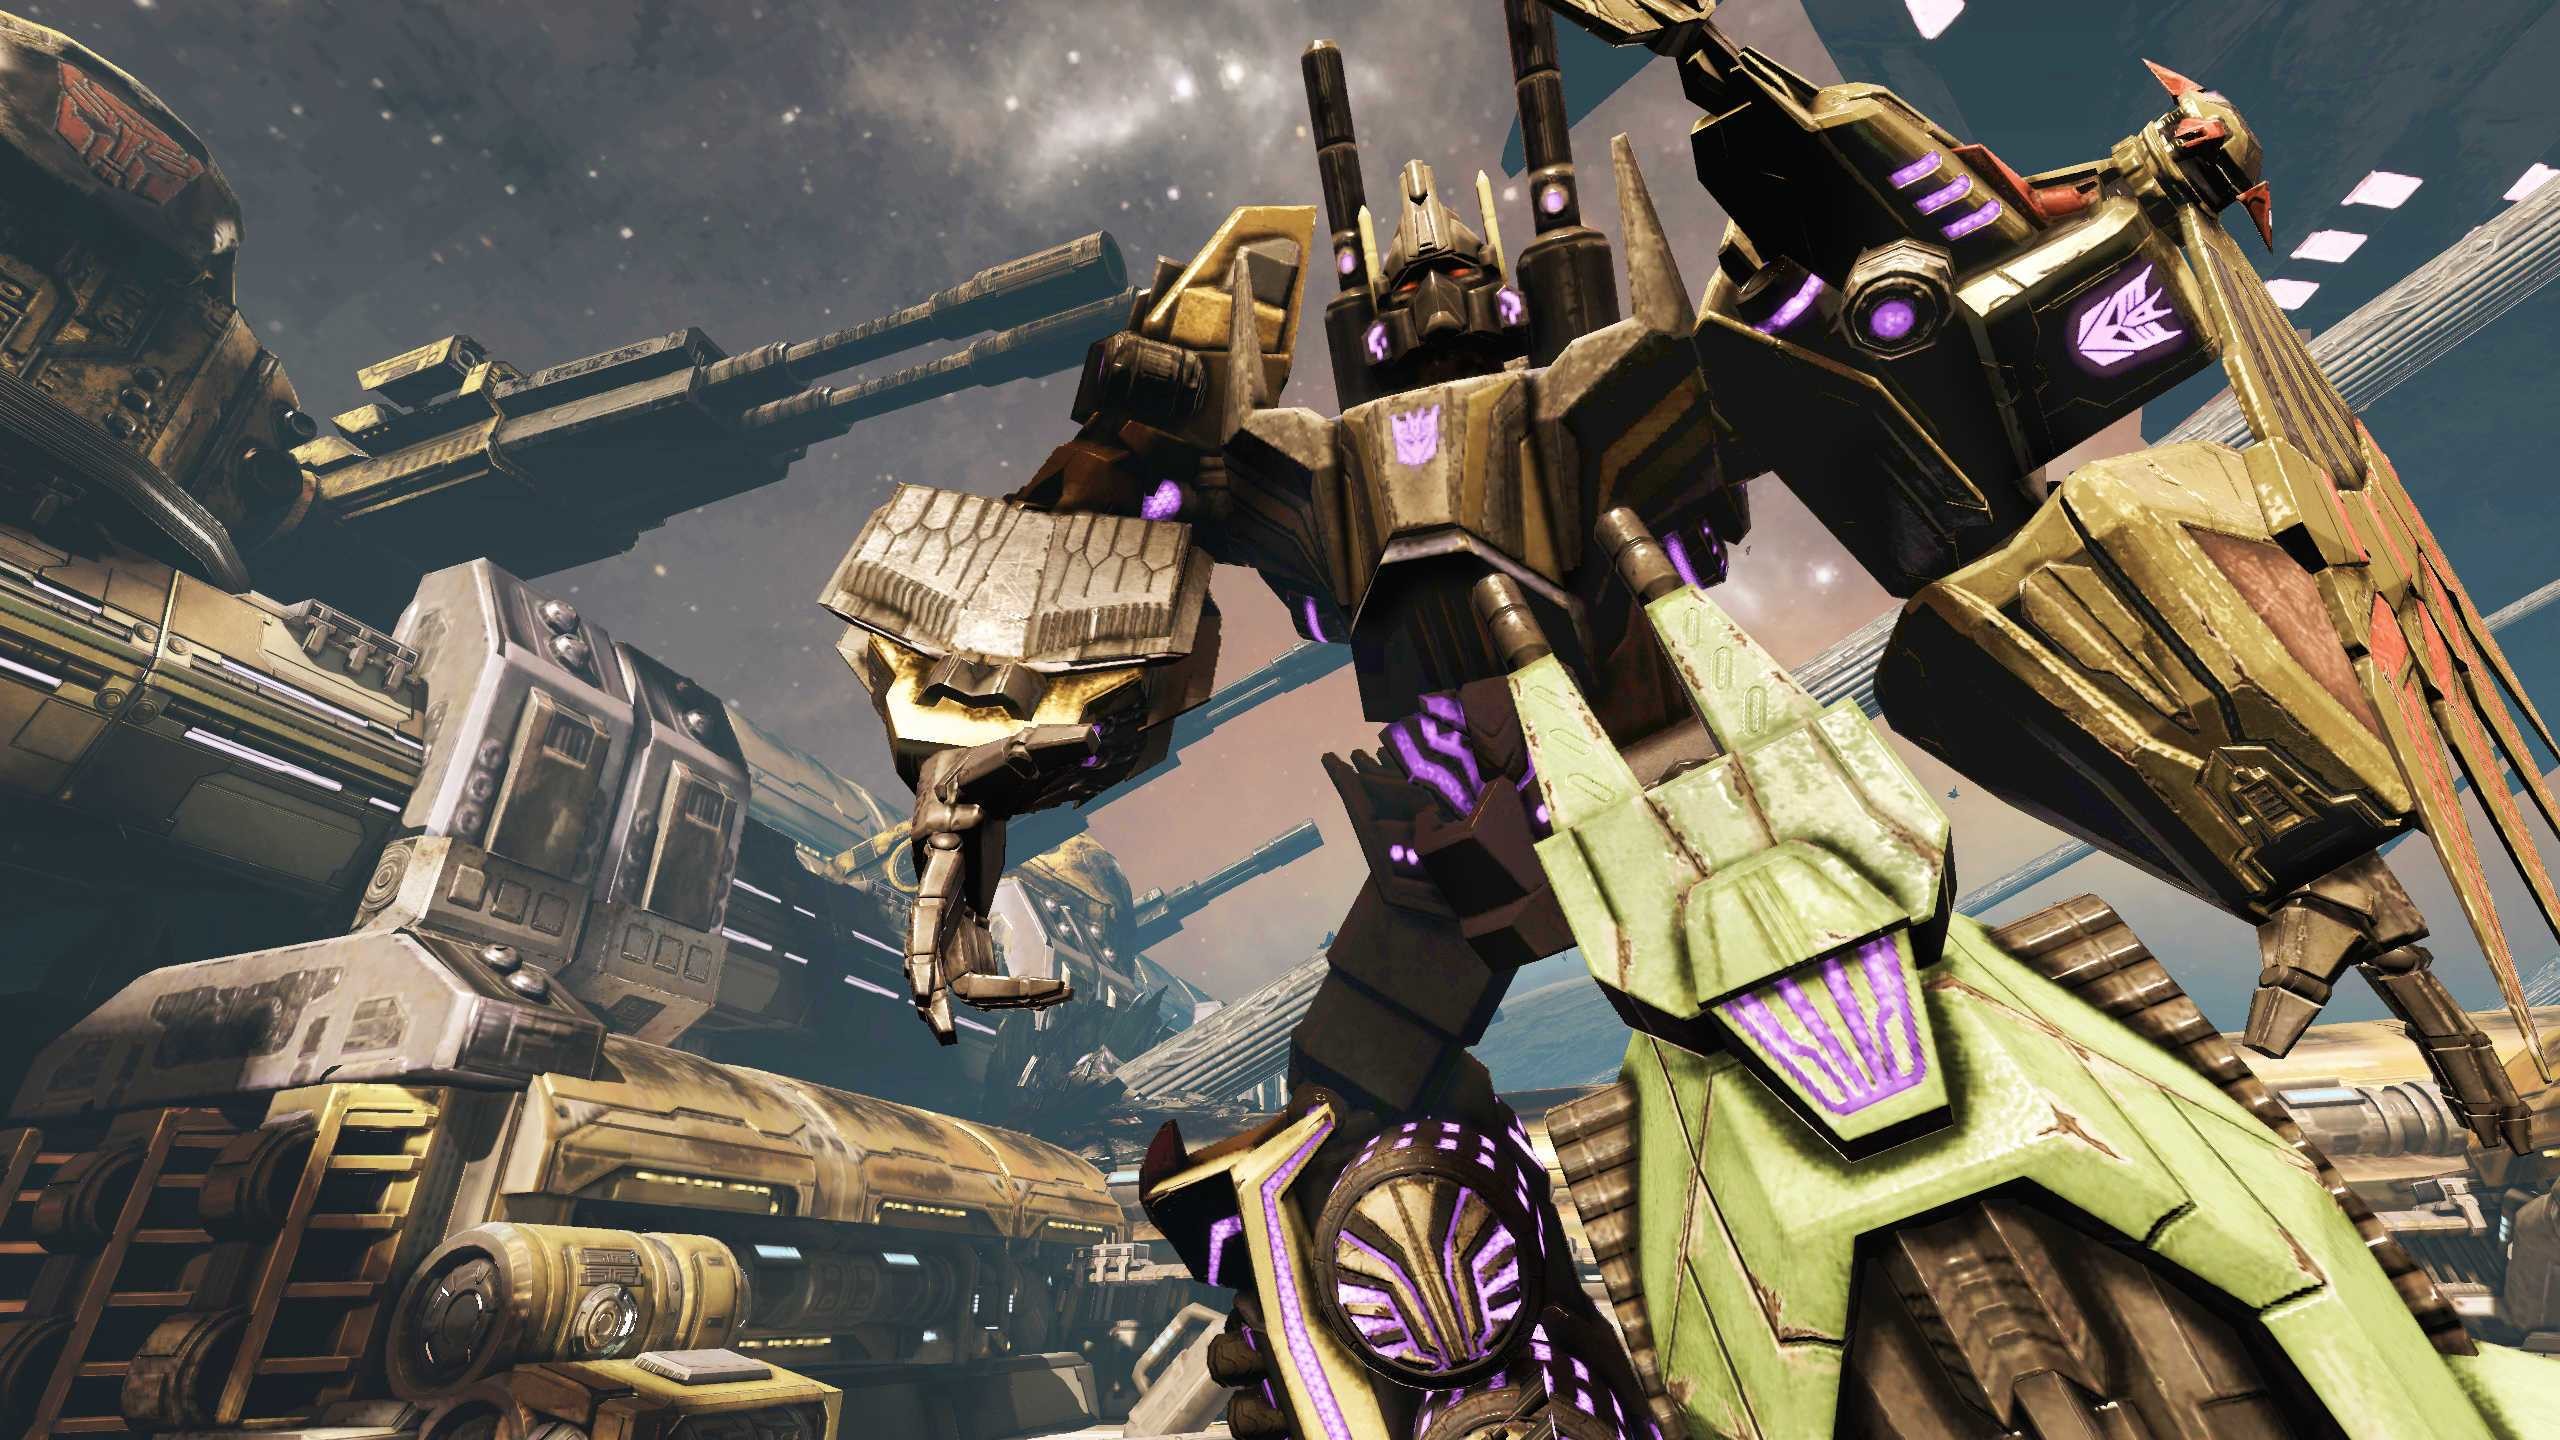 2560x1440 Sequences involving larger Transformers, such as Bruticus, would often  involve large numbers of enemy combatants on screen at once.